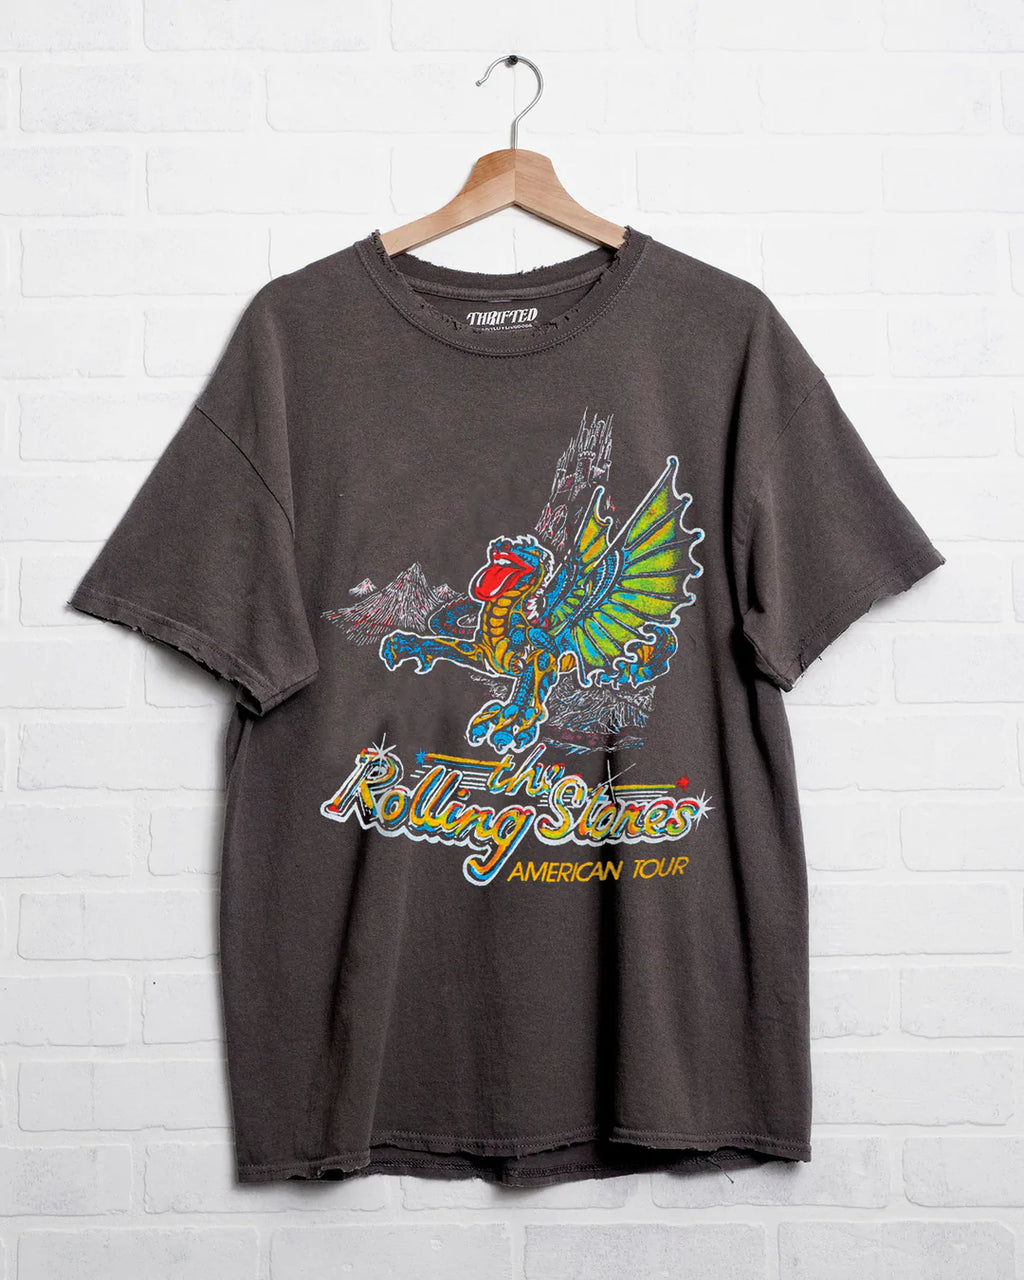 LivyLu Rolling Stones American Dragon Tour Charcoal Thrifted Distressed Tee